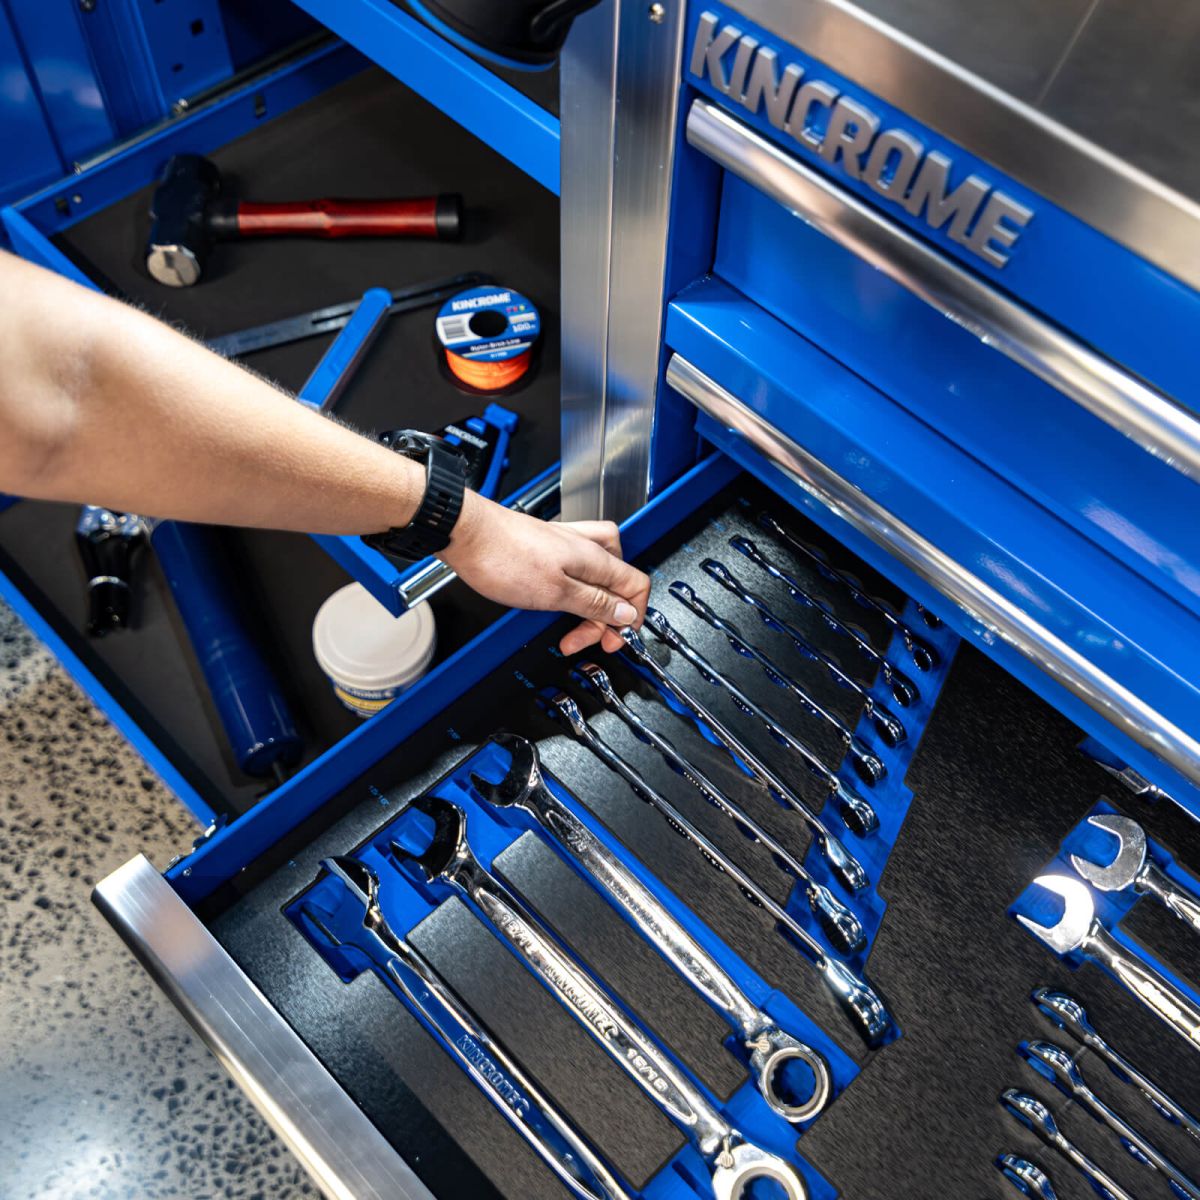 Choosing Kincrome Tools for Quality and Reliability